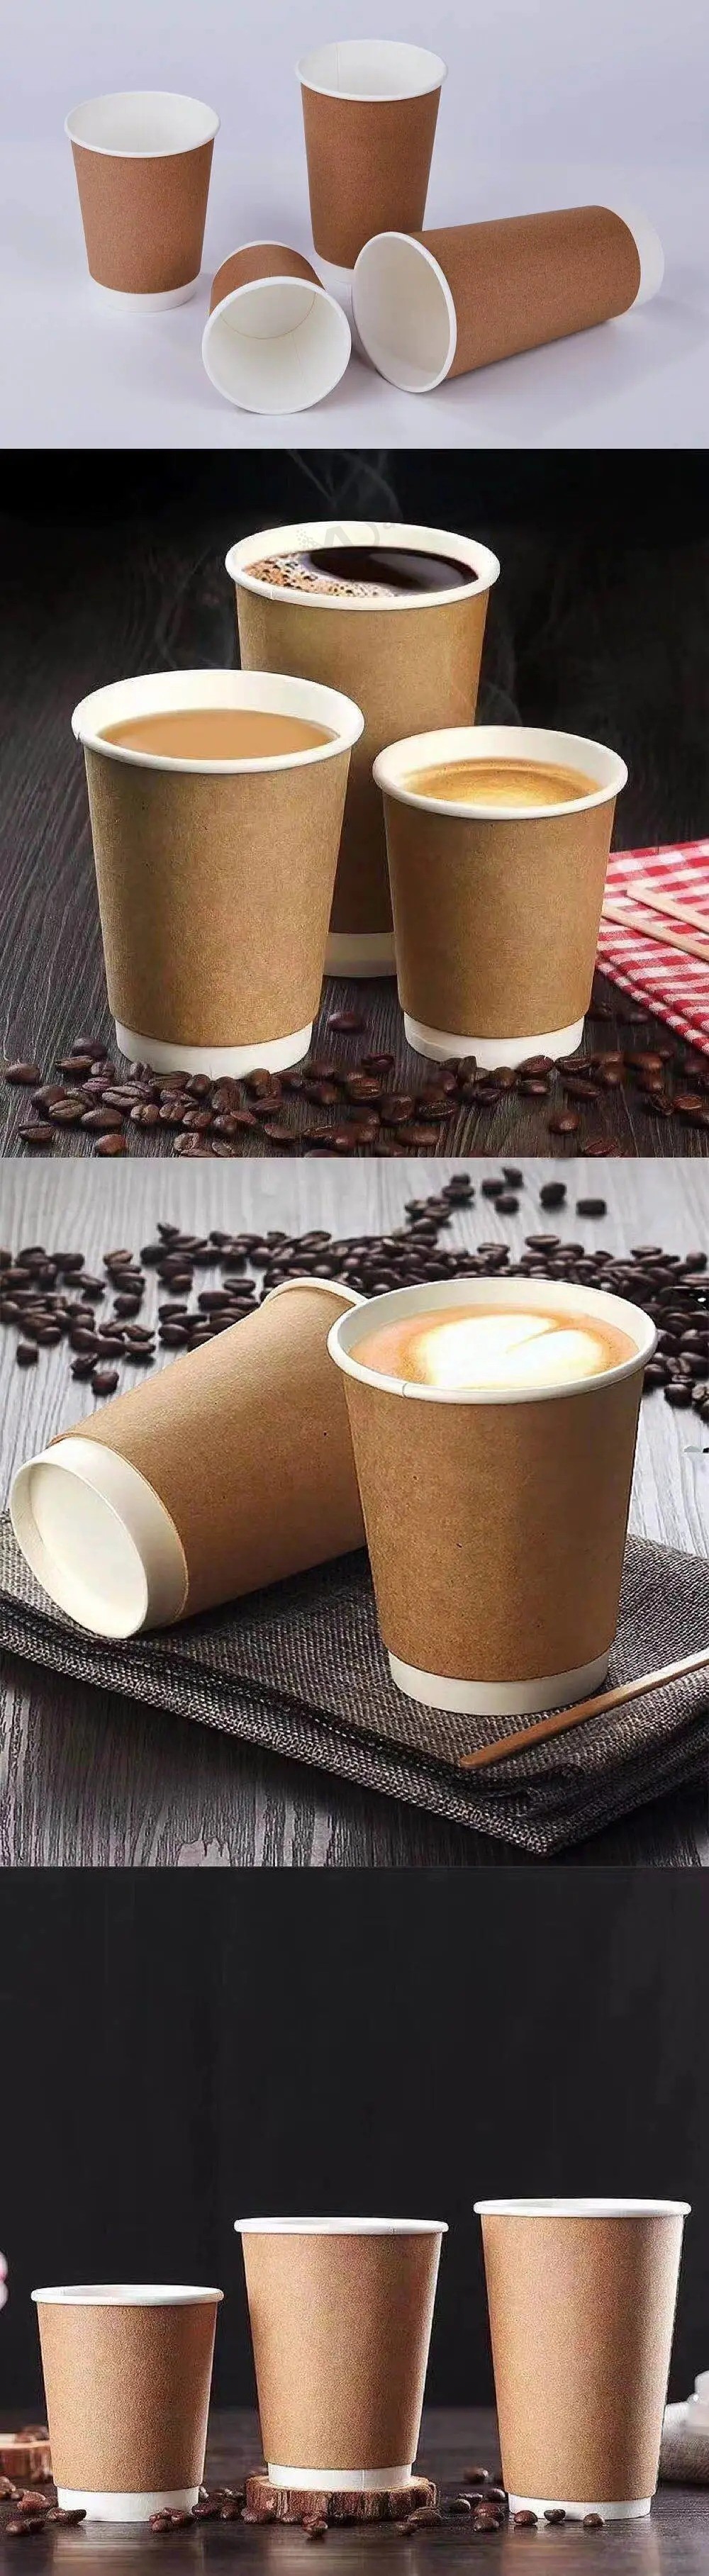 Wholesale Disposable Recyclable Double Wall Coffee Paper Cup with Custom Logo Printing for Hot Drinking